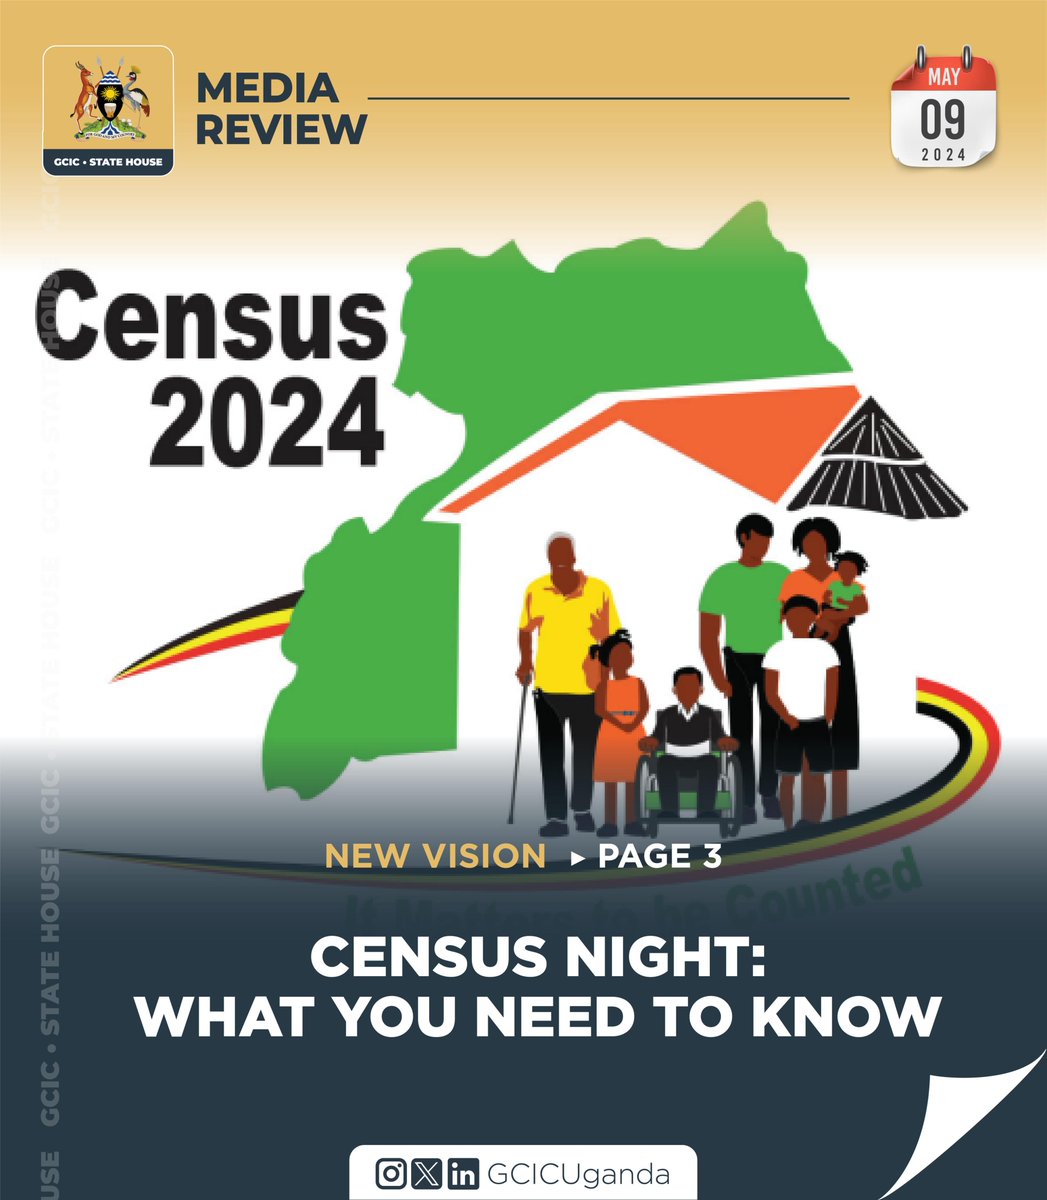 🌃ᴄᴇɴꜱᴜꜱ ɴɪɢʜᴛ!  @GovUganda  is about to begin the census, a pre-census activity that offers critical demographic, needs, and trend information ahead of the main event.

#GCICMediaReview
#UgandaCensus2024 🔗media.gcic.go.ug/gcic-media-rev……